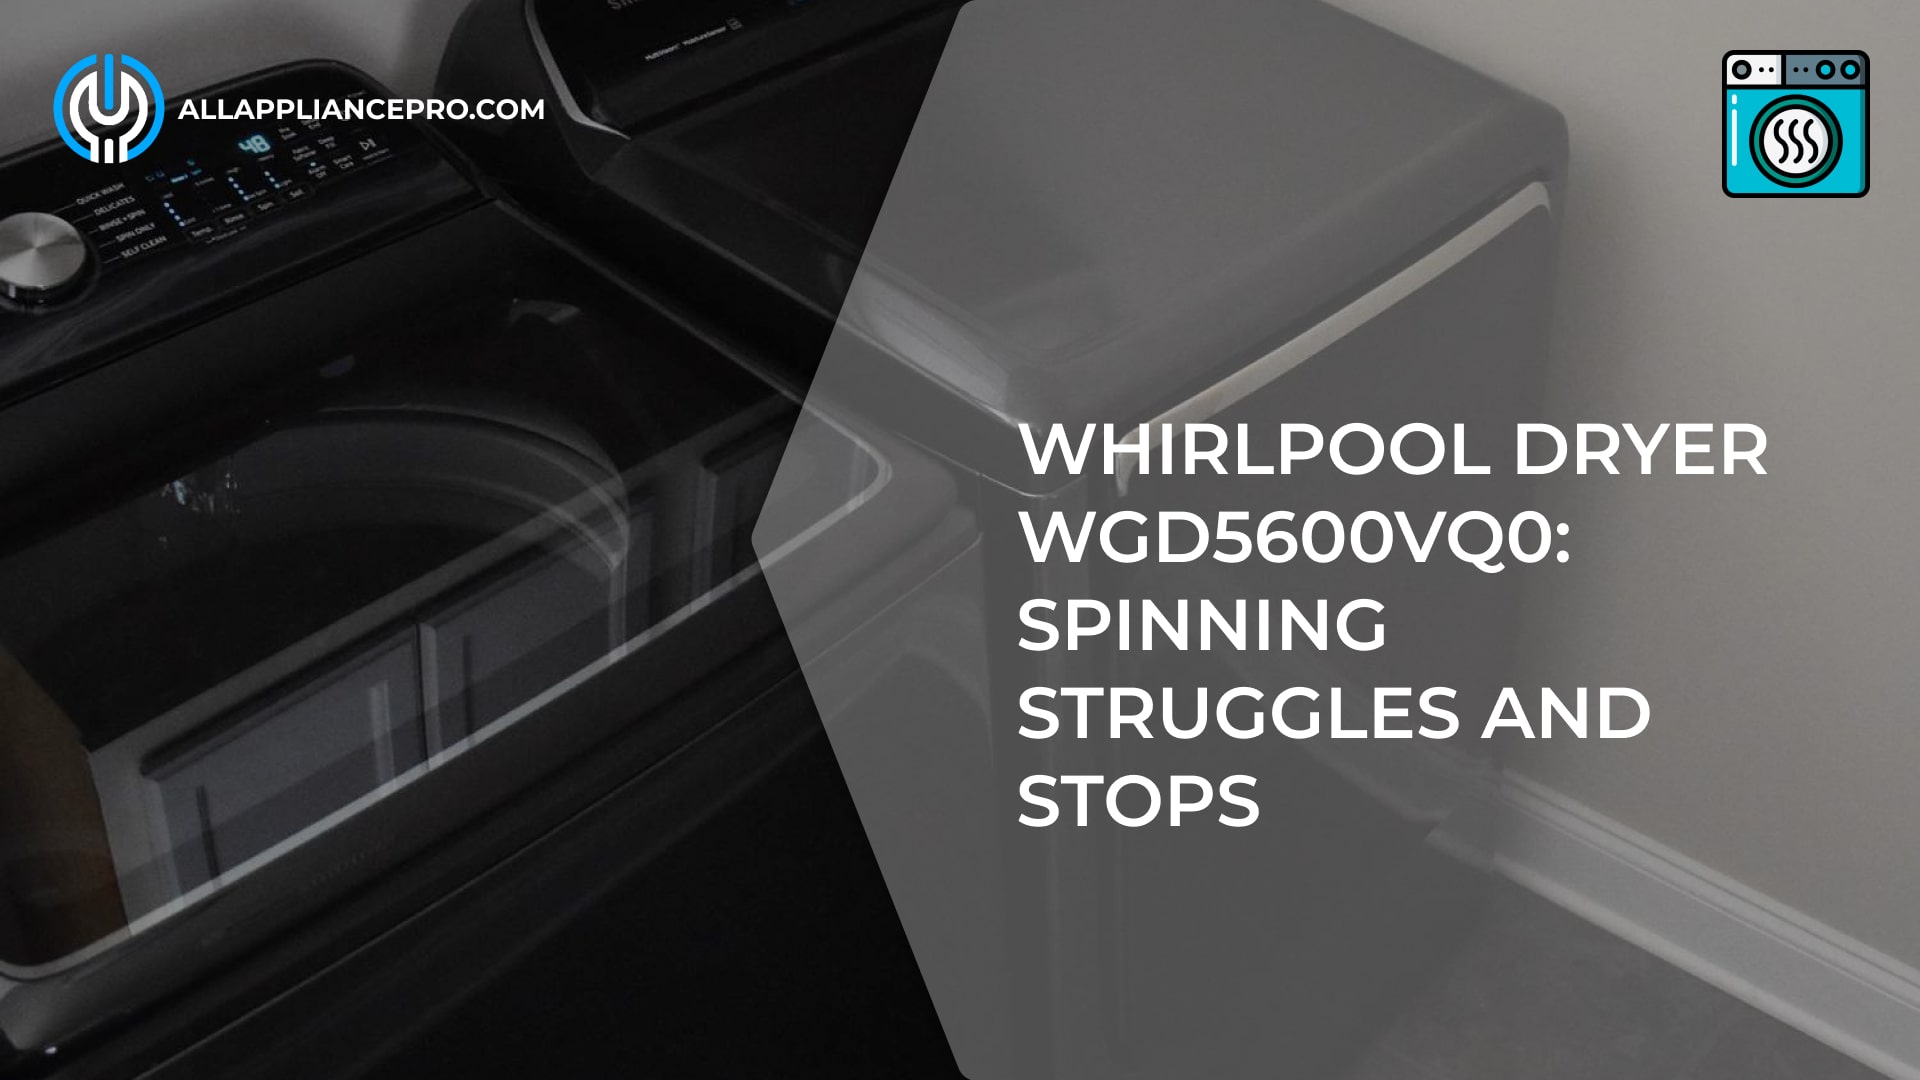 Whirlpool Dryer WGD5600VQ0: Spinning Struggles and Stops